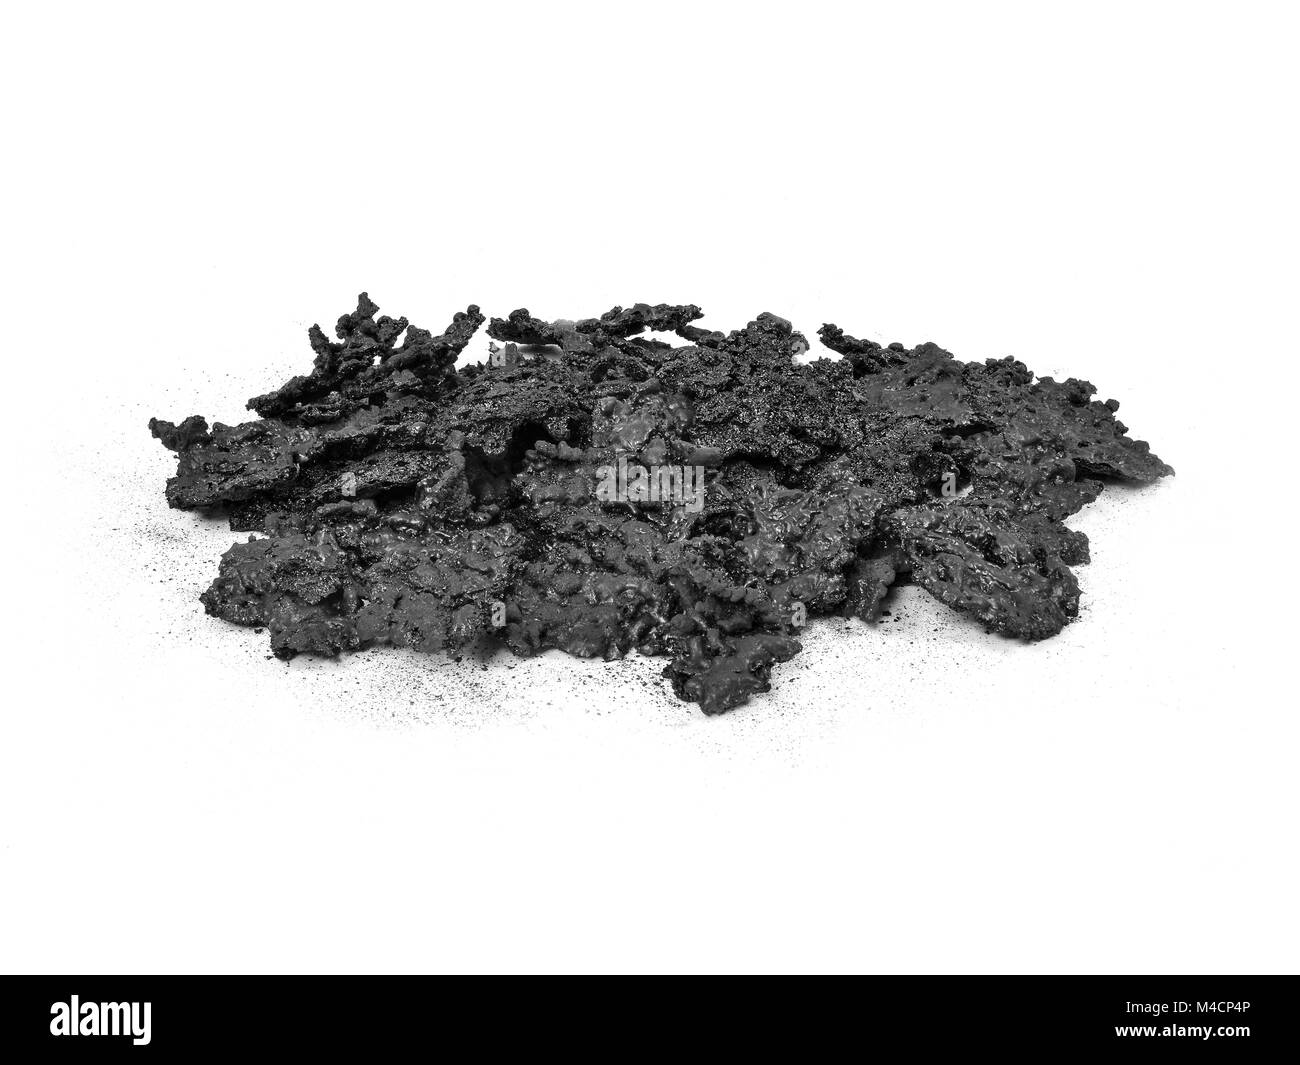 Pile of Creosote accumulation that was removed from a Wood Stove Chimney during Stove Pipe Cleaning. Stock Photo